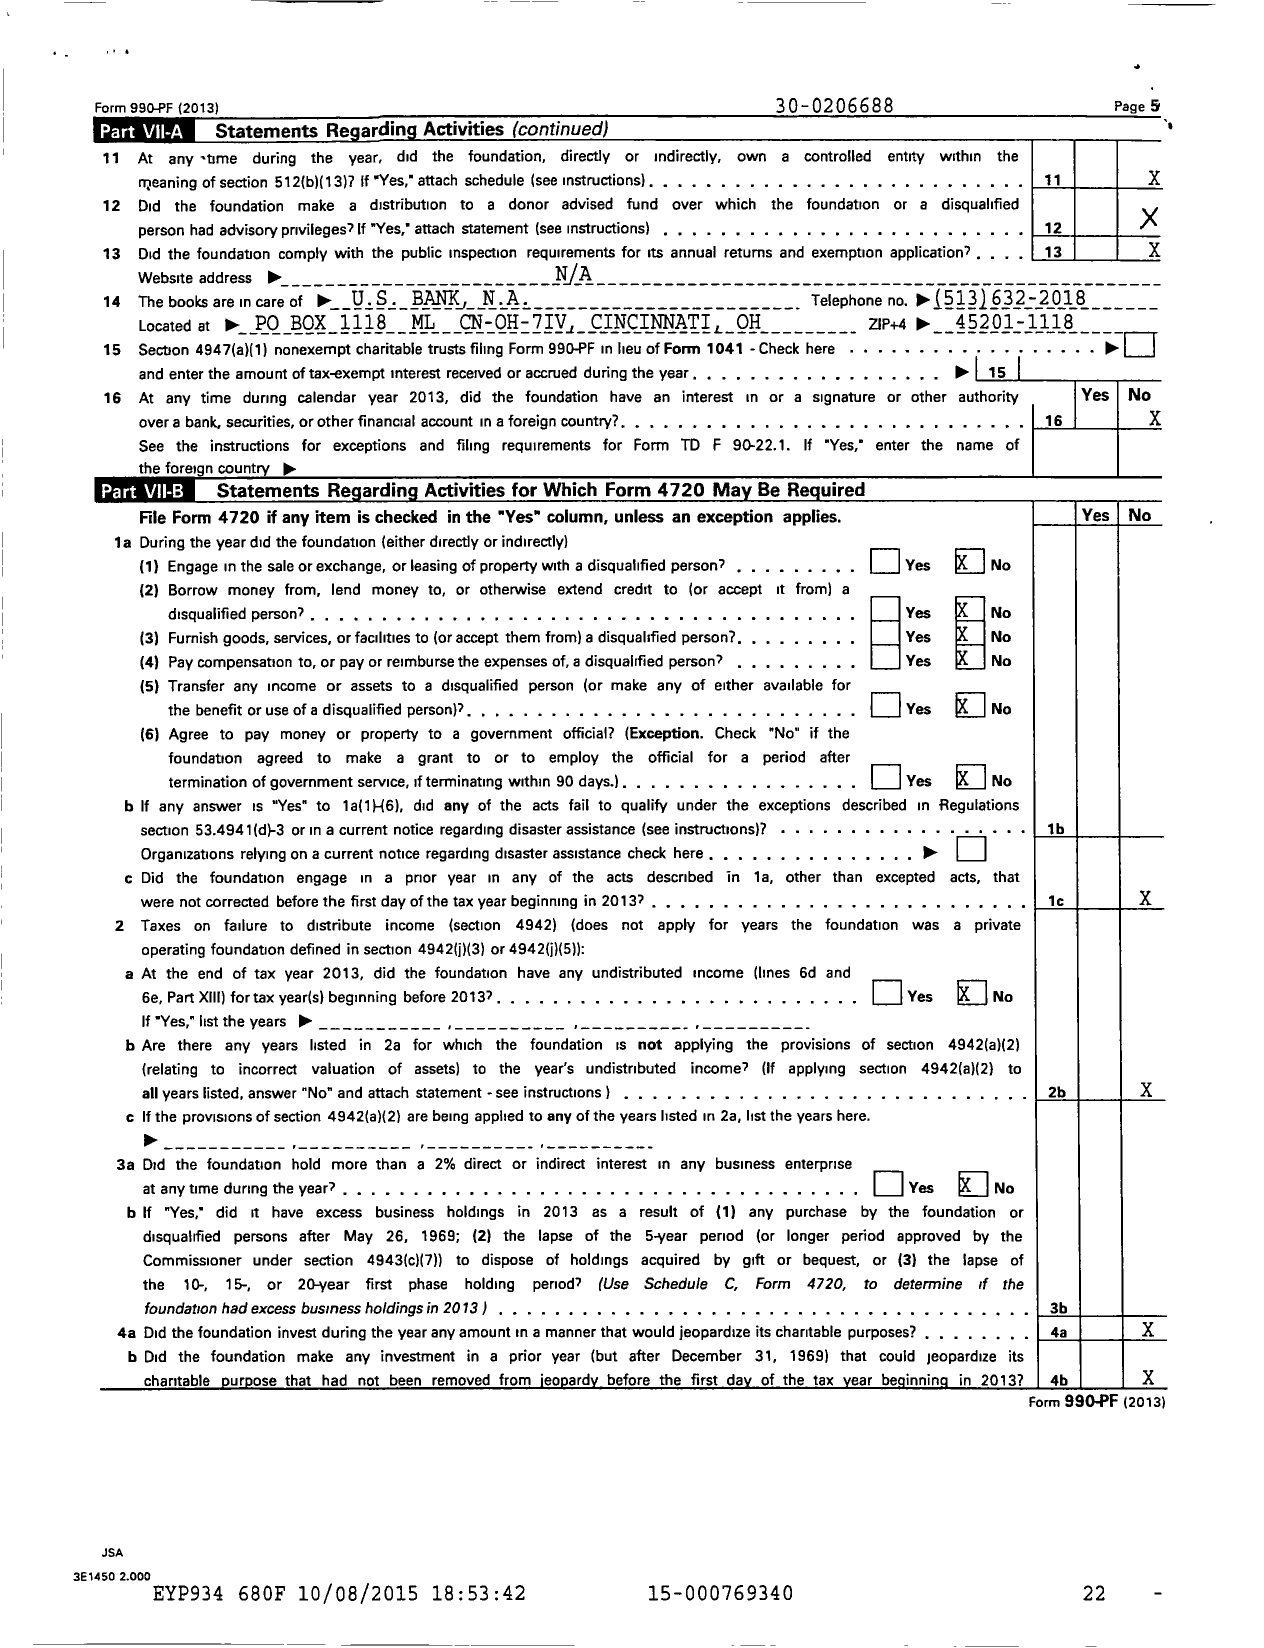 Image of first page of 2013 Form 990PF for Robert Adele Schiff Family Foundation